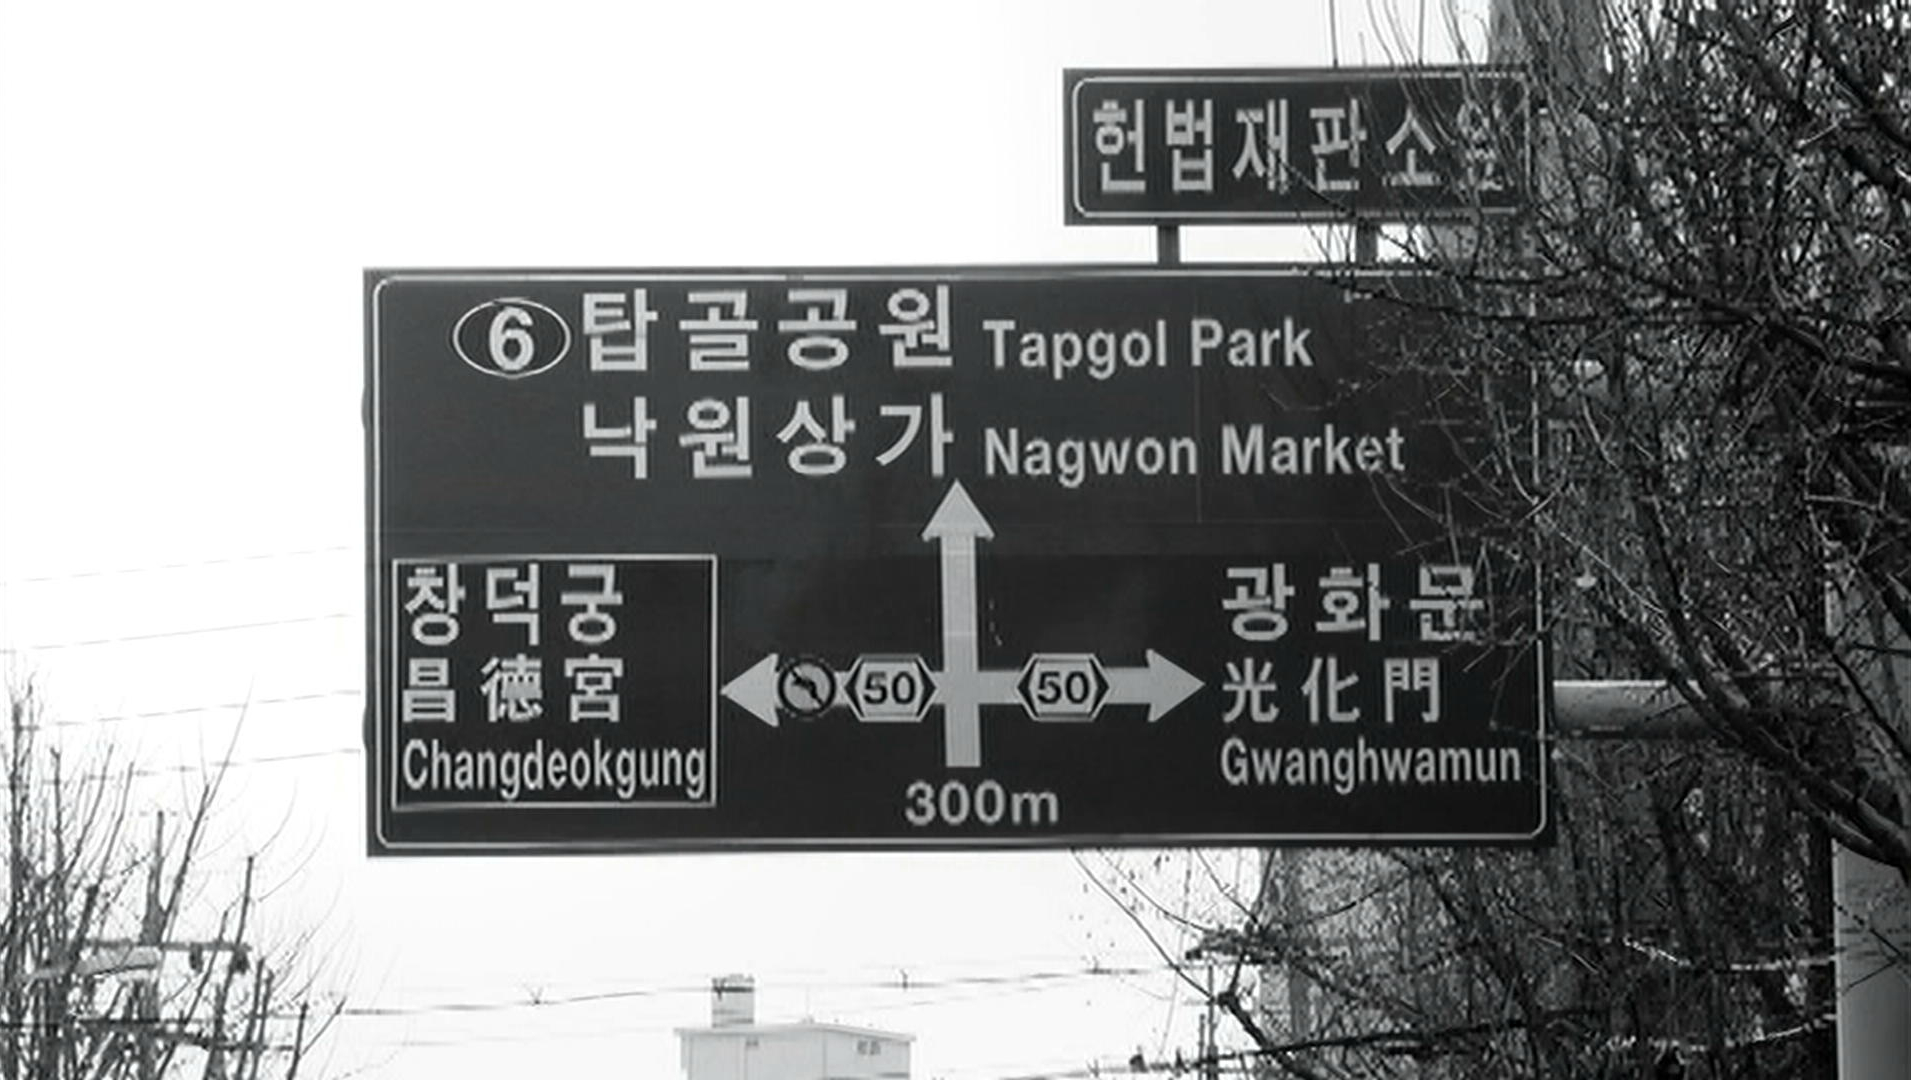 The Day He Arrives - 북촌방향 - Hong Sang-soo - opening shot - directional sign - Constitutional Court intersection - Bukchon - Seoul - Day 1